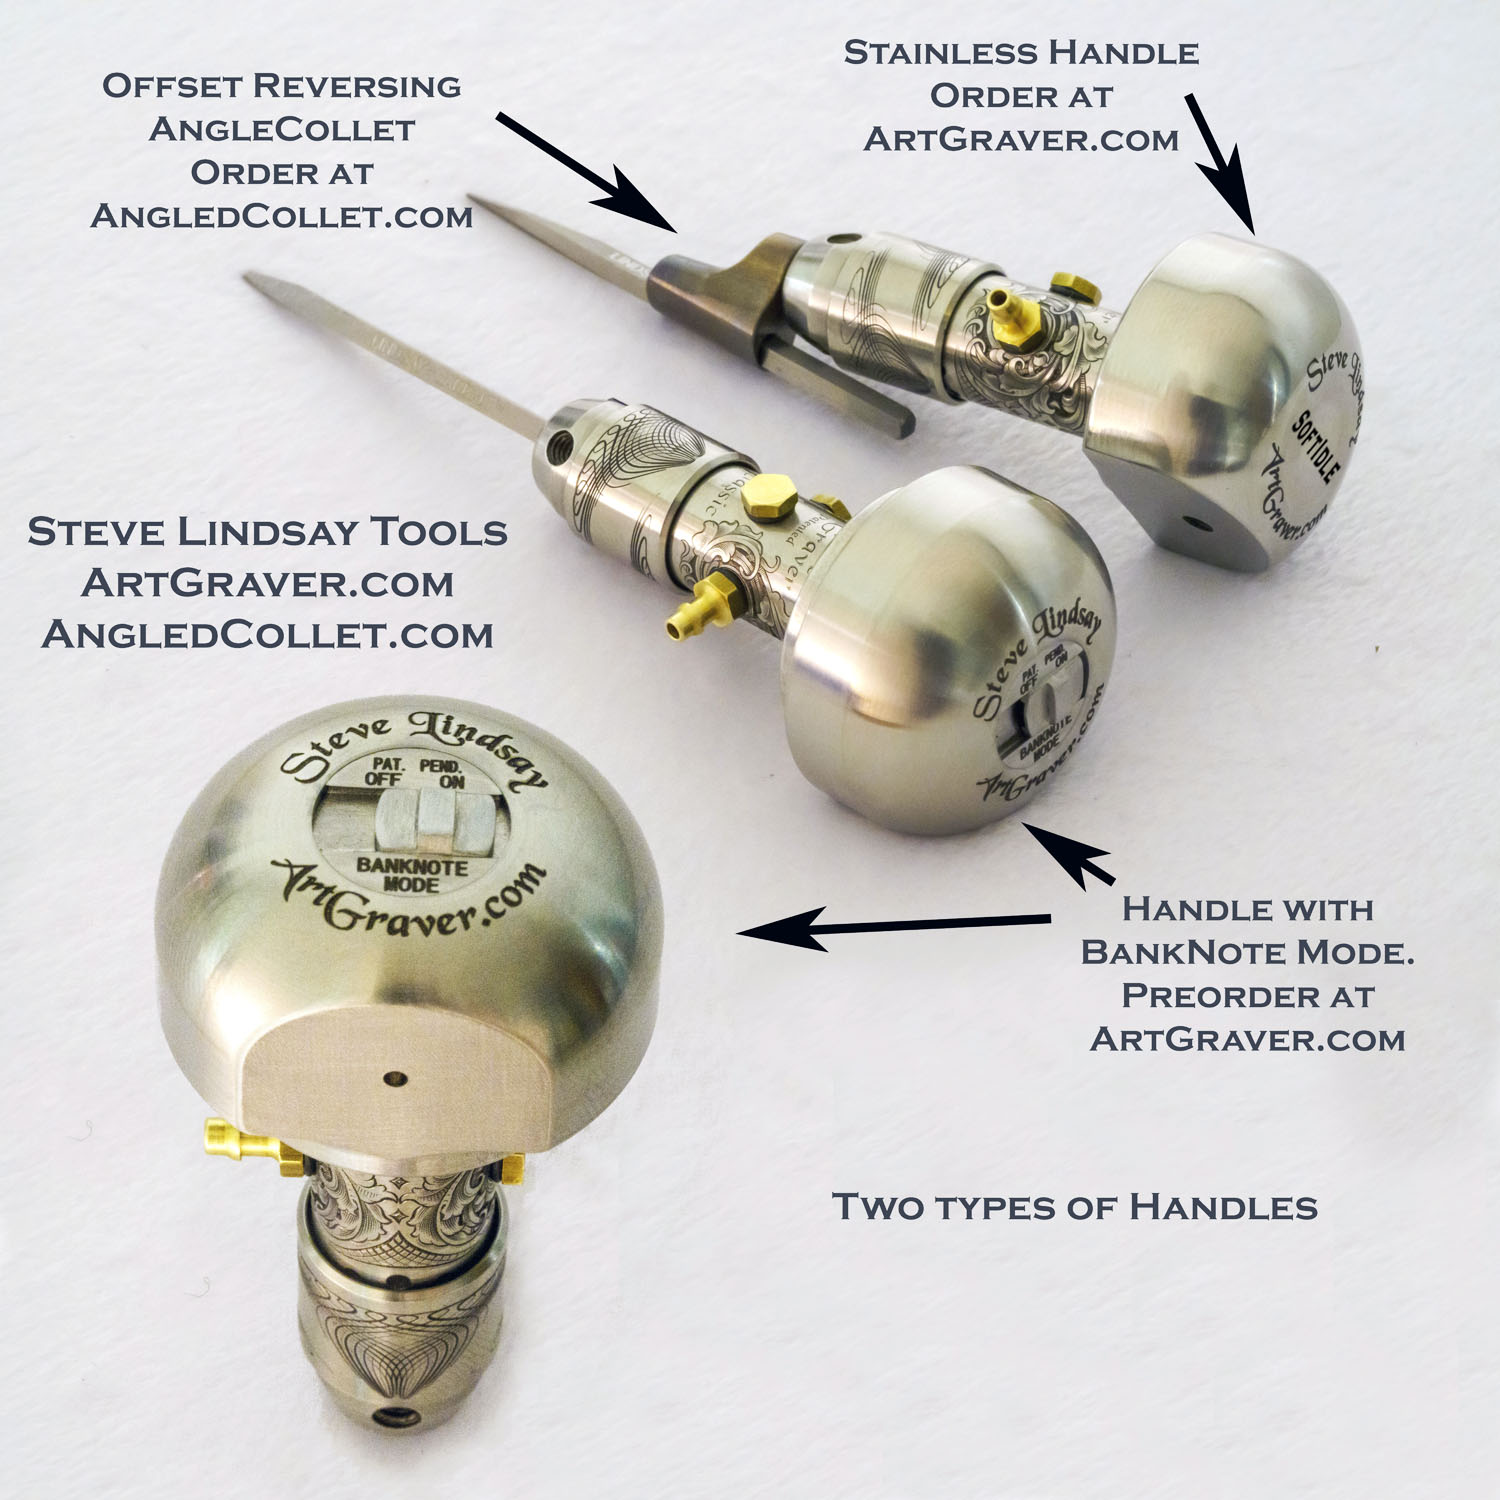 HAND ENGRAVING TOOLS AND HAND ENGRAVING EQUIPMENT FOR JEWELERS AND ARTISTS.  Learn to hand engrave with the patented Lindsay AirGraver Engraving Tools  for Hand Engravers, Jewelers and Artists ~ Steve Lindsay